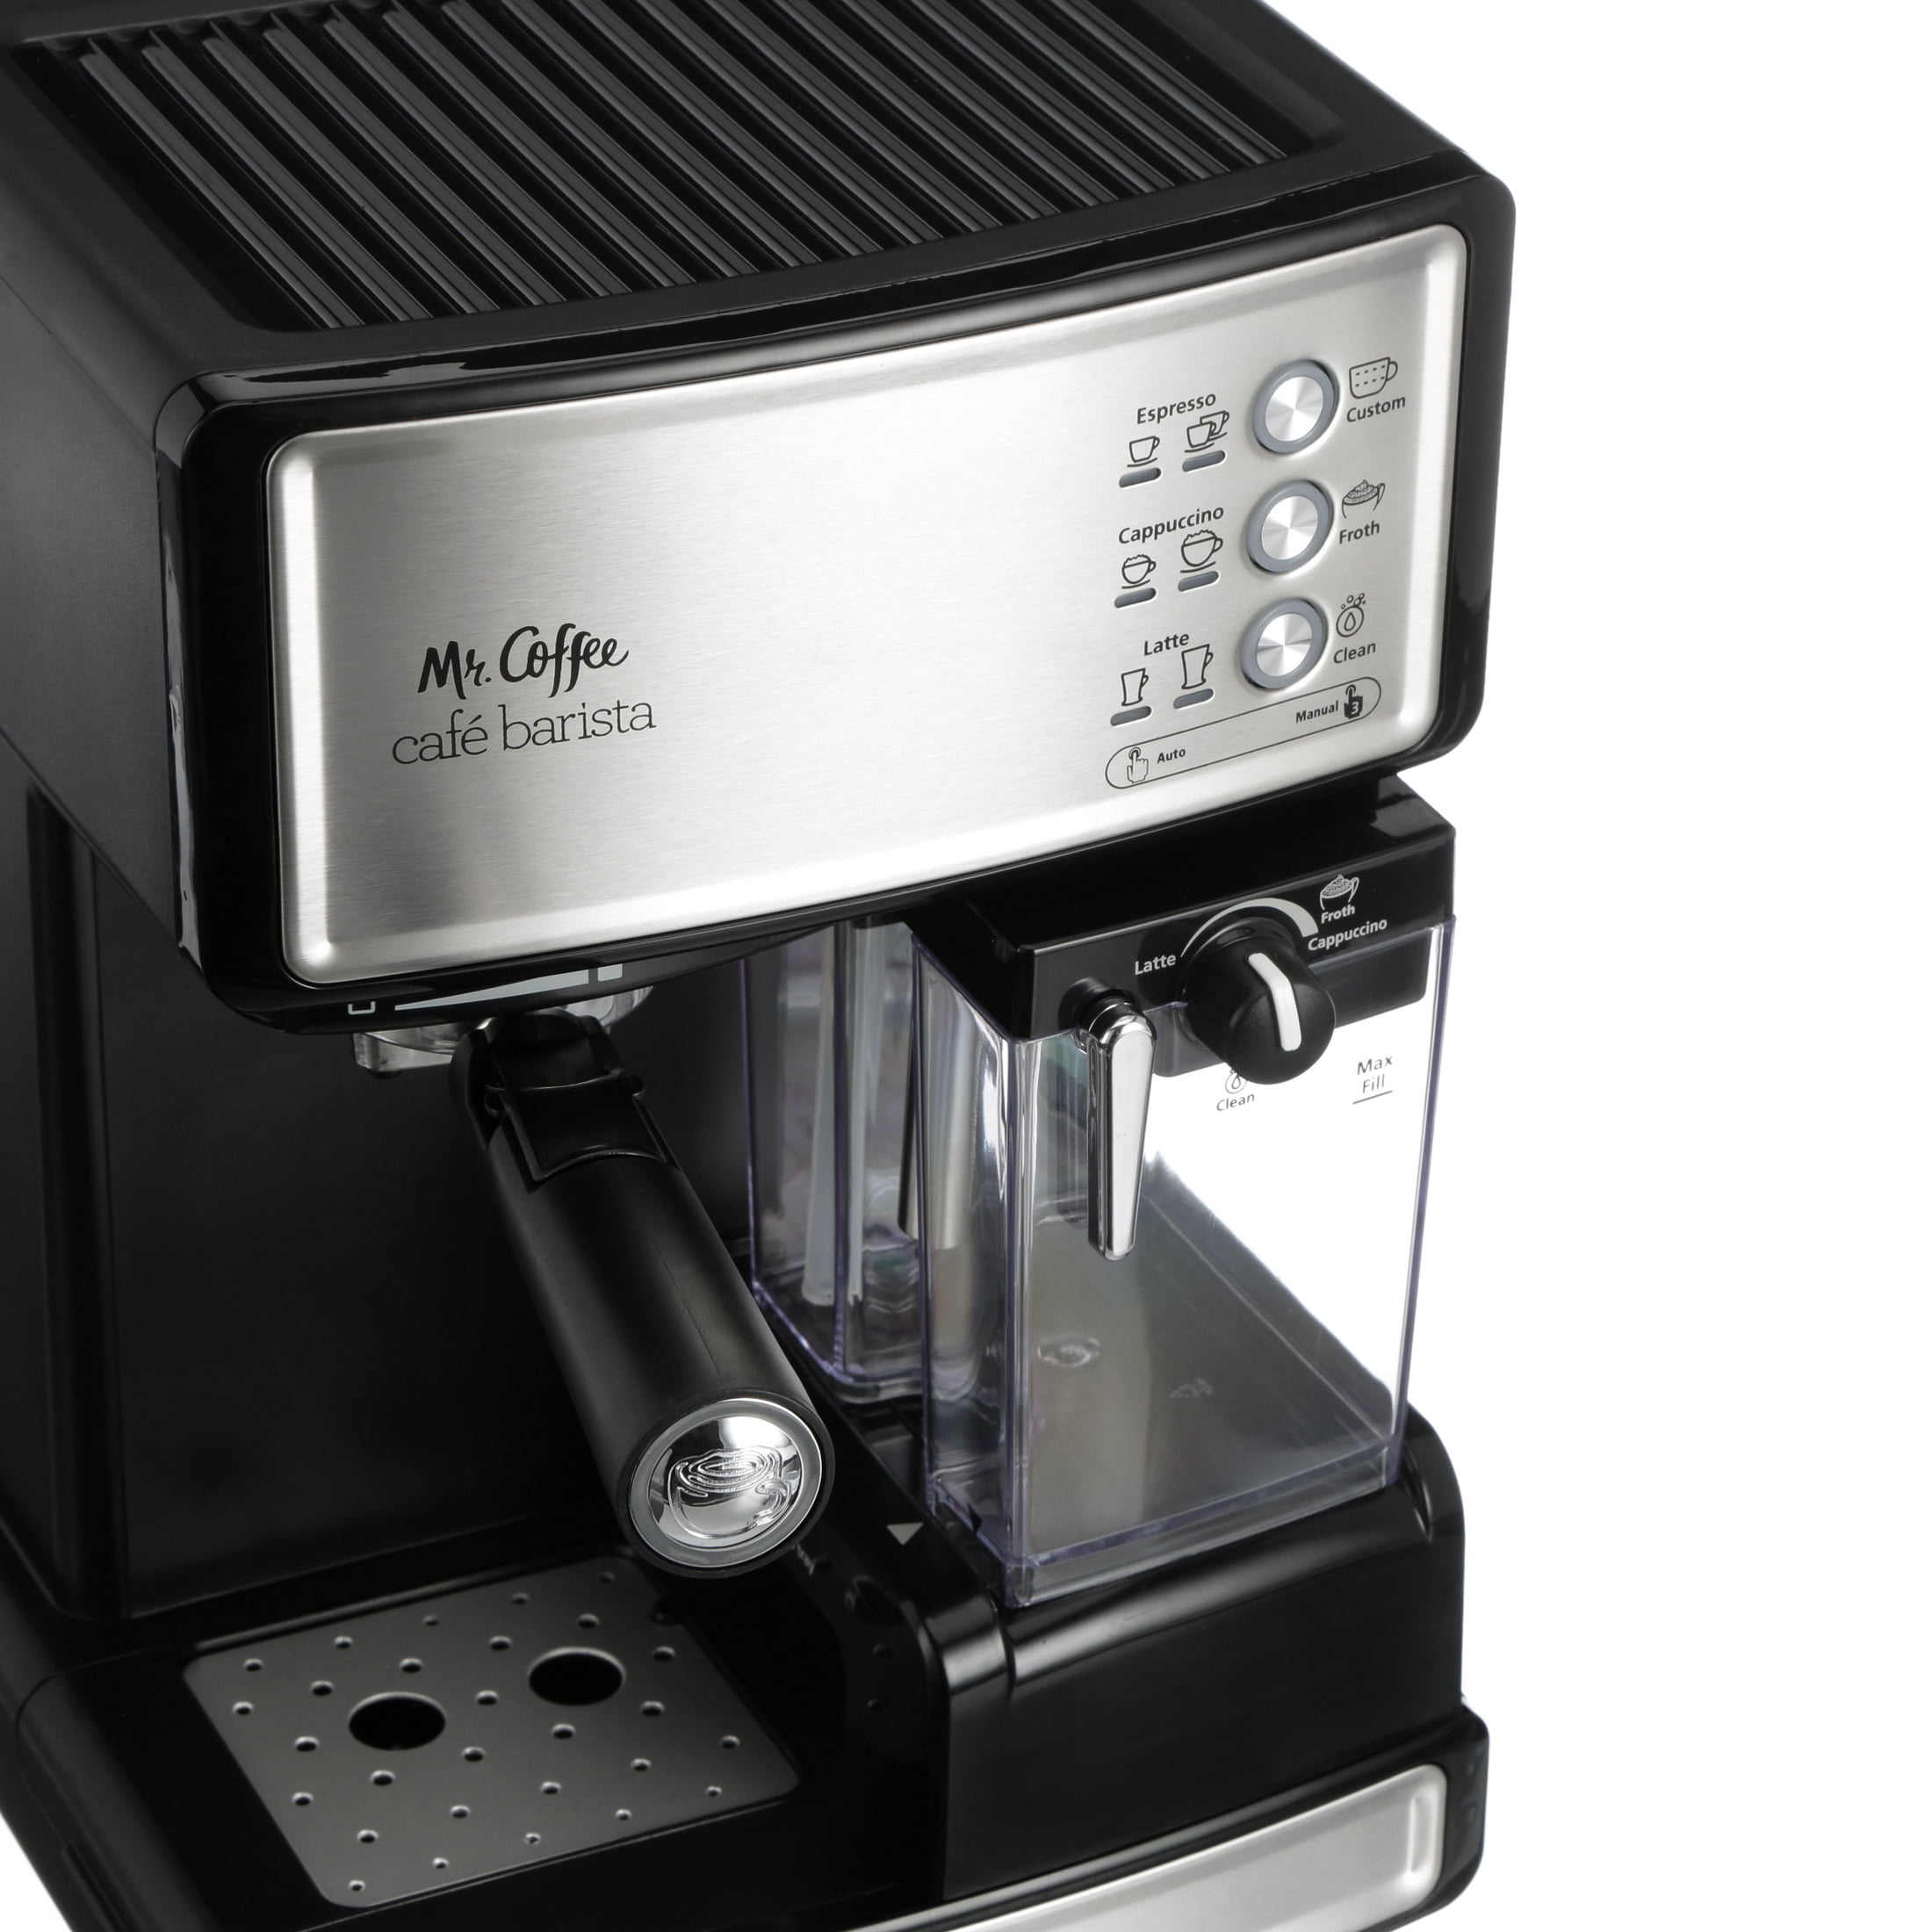 Mr. Coffee Cafe Barista Review - Froth on Board!